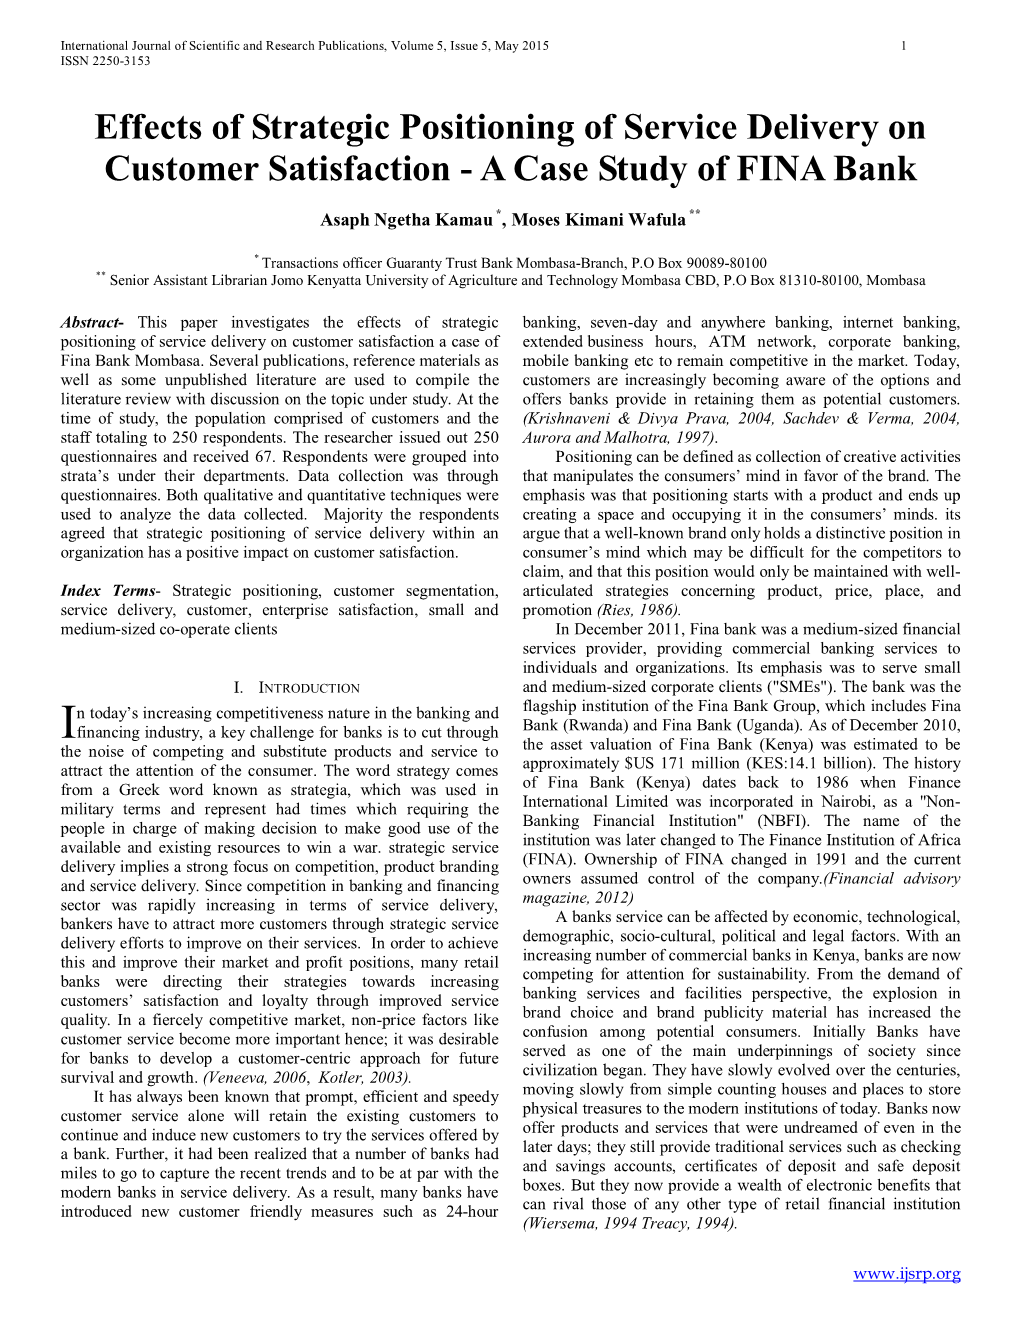 Effects of Strategic Positioning of Service Delivery on Customer Satisfaction - a Case Study of FINA Bank